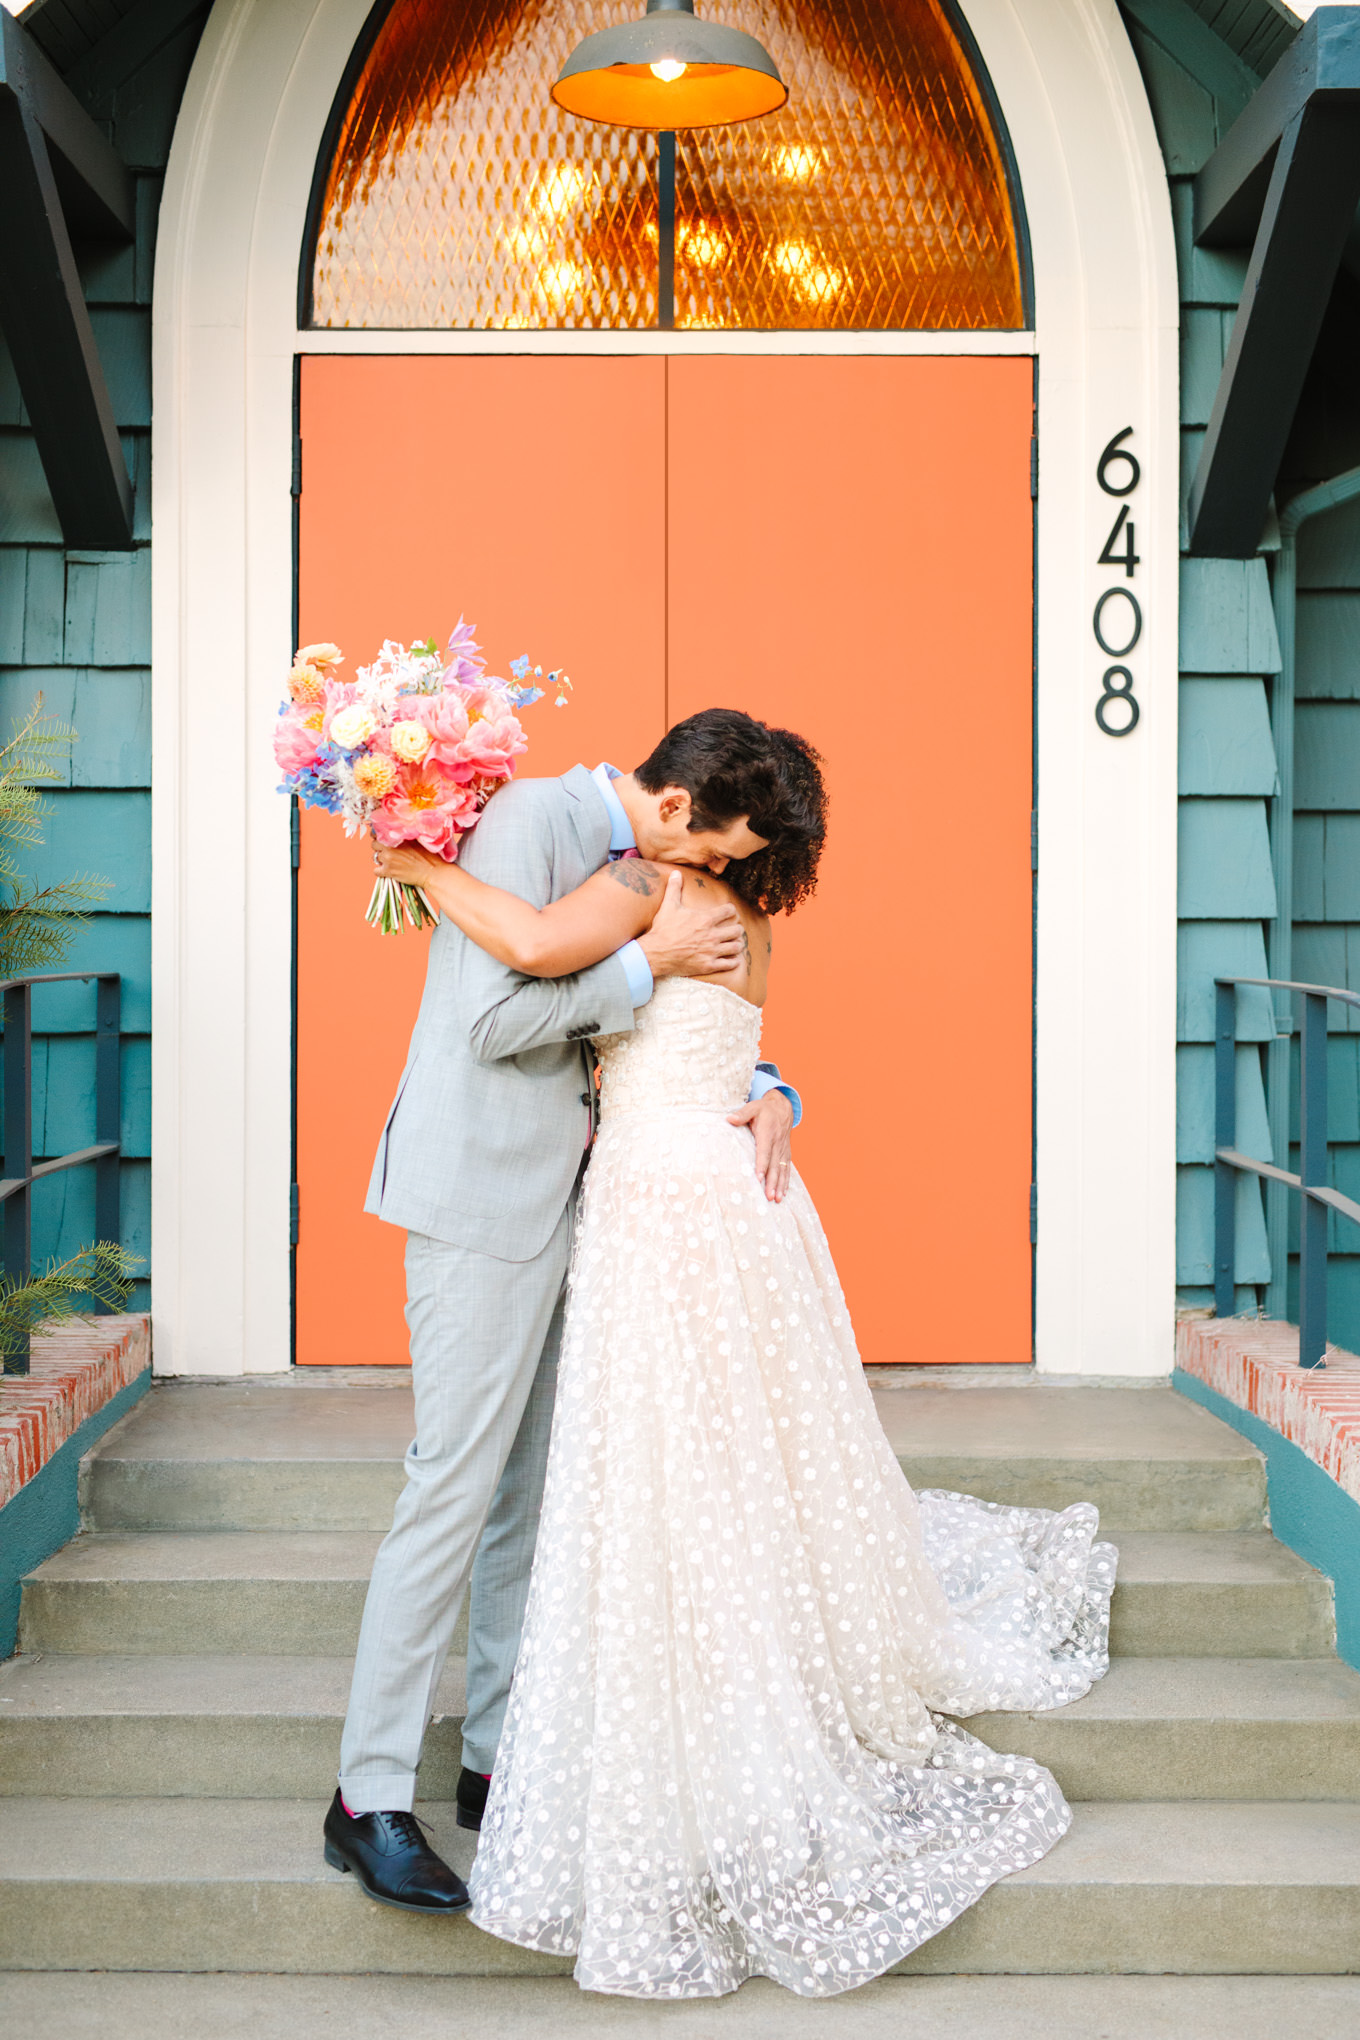 Bride and groom embracing after wedding ceremony | Colorful pop-up micro wedding at The Ruby Street Los Angeles featured on Green Wedding Shoes | Colorful and elevated photography for fun-loving couples in Southern California | #colorfulwedding #popupwedding #weddingphotography #microwedding Source: Mary Costa Photography | Los Angeles